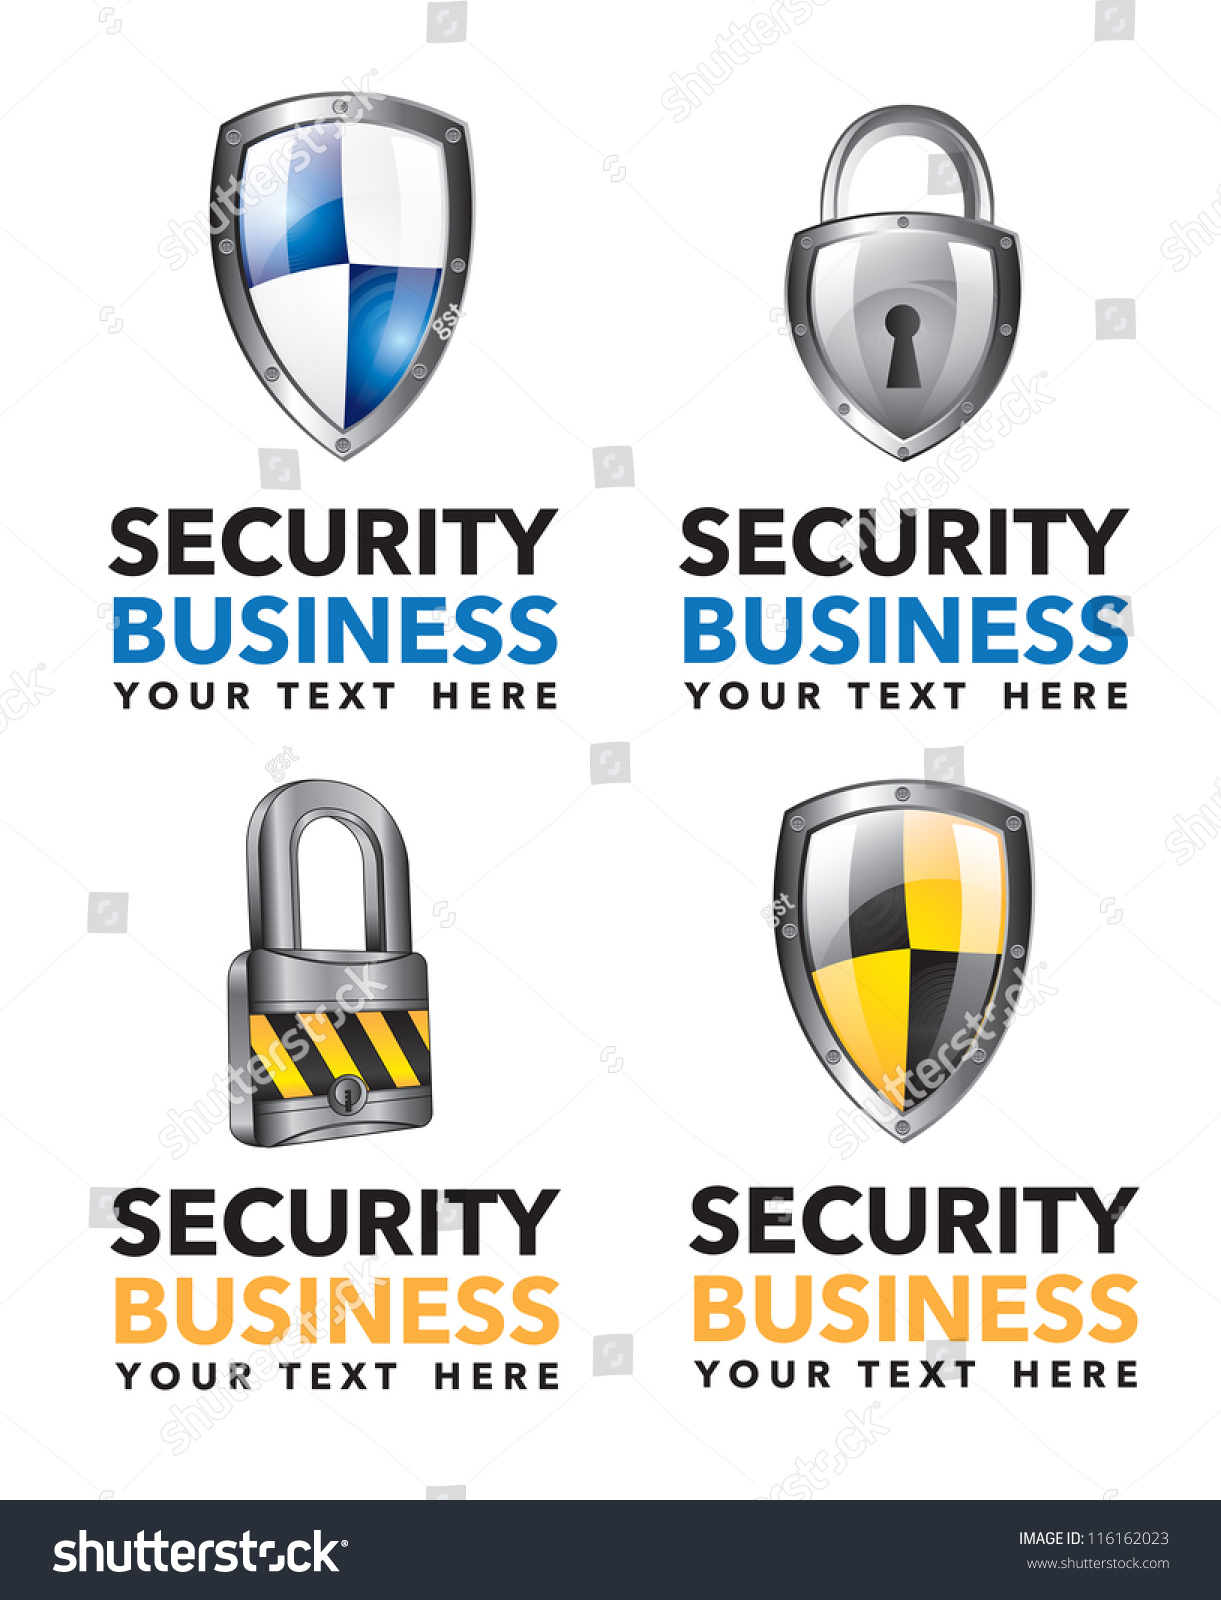 Different Security Business Icons Over White Background Vector